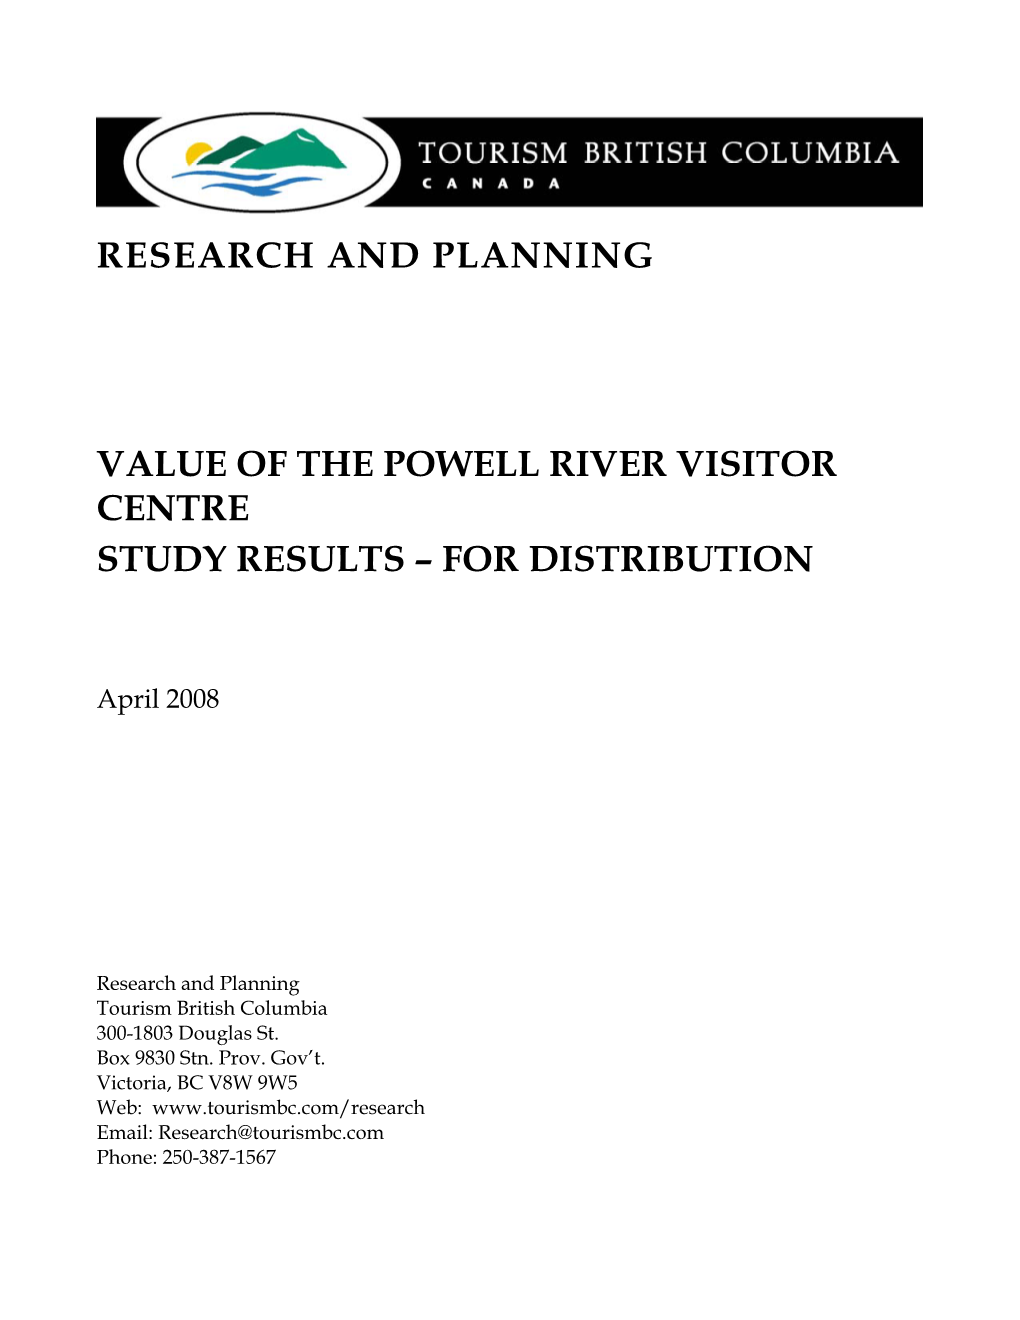 Research and Planning Value of the Powell River Visitor Centre Study Results